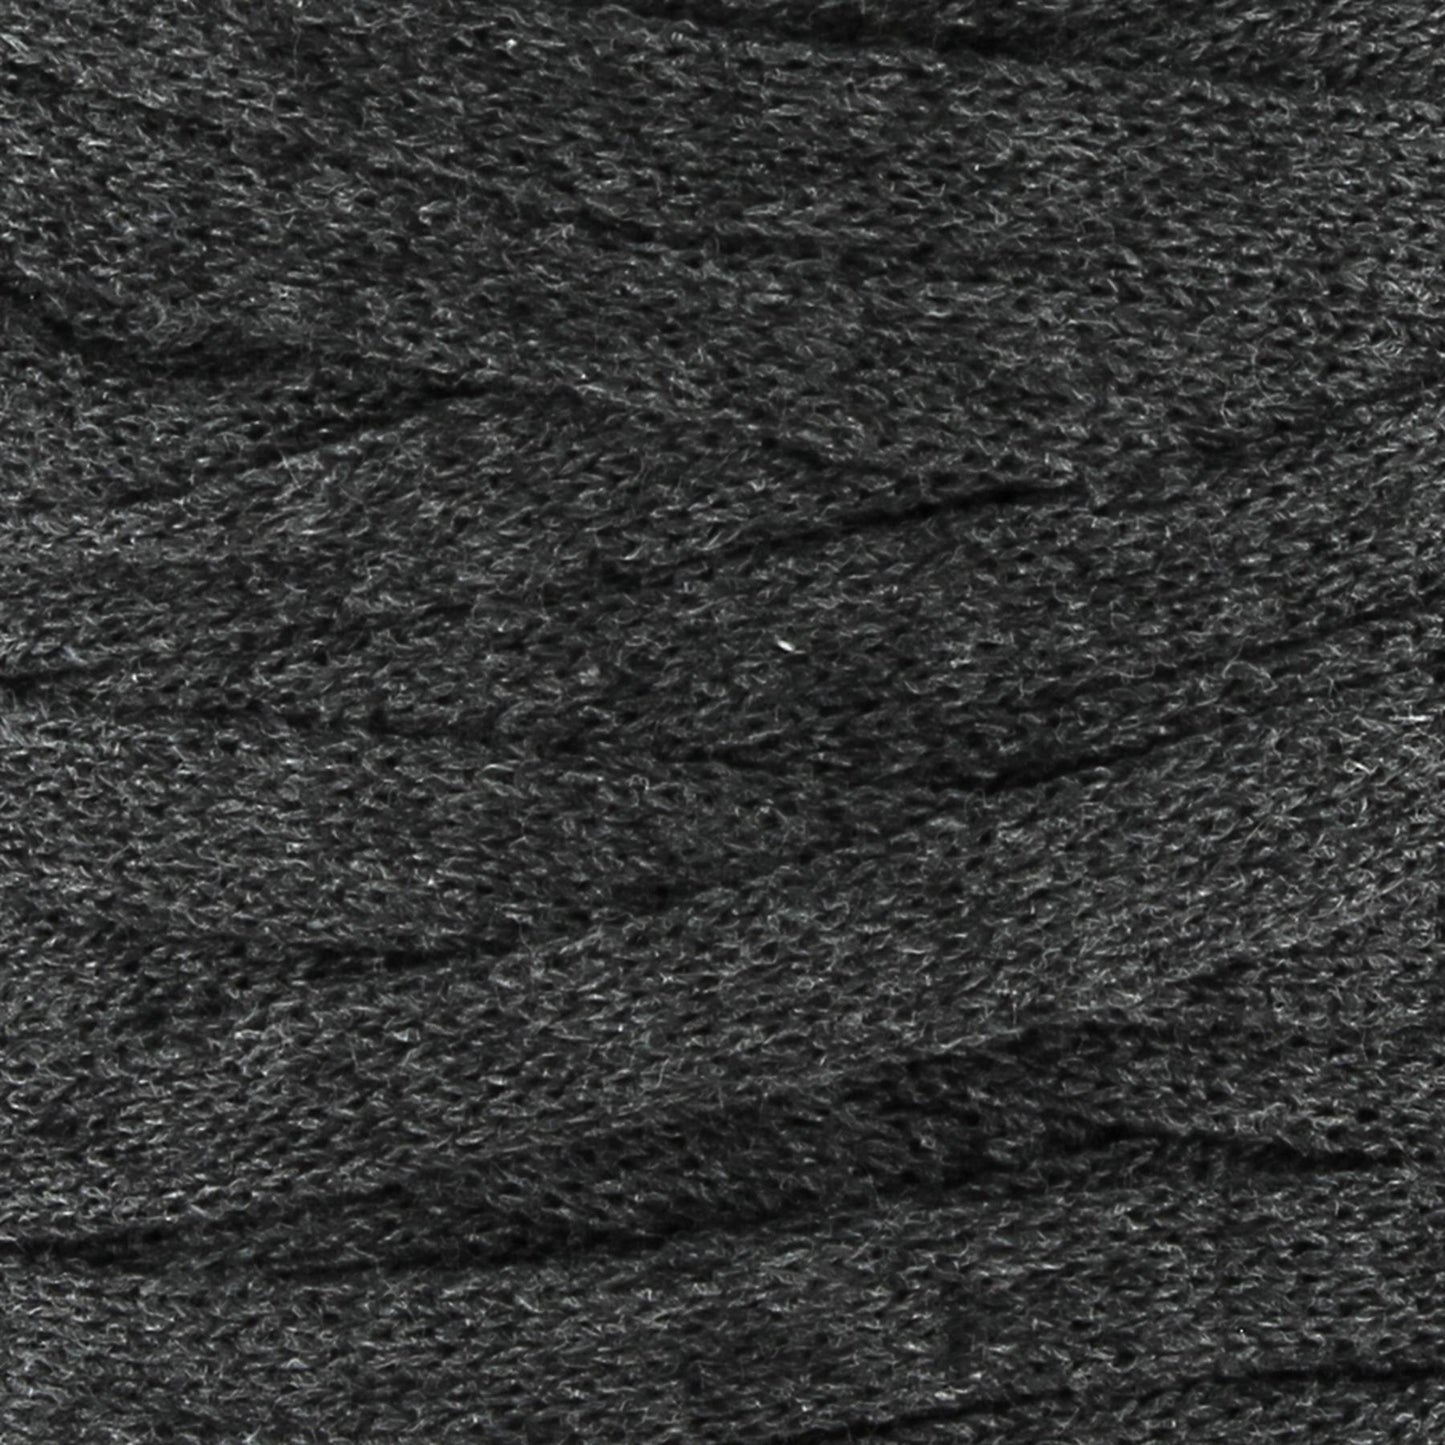 [Hoooked] RXL49MINI RibbonXL Charcoal Anthracite Cotton Yarn - 60M, 125g